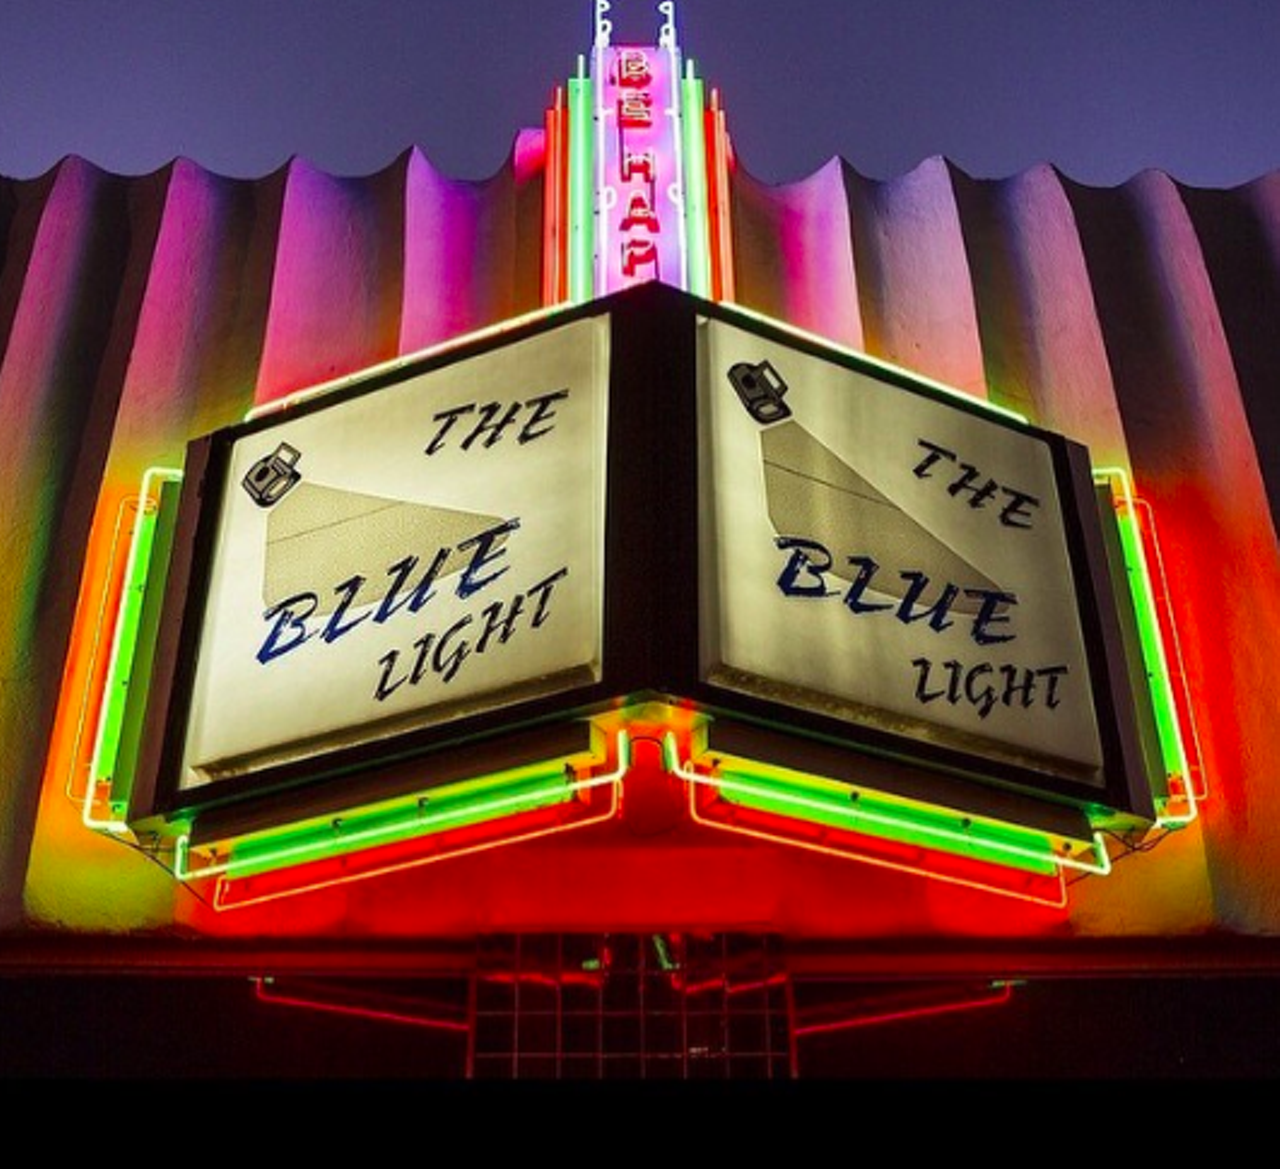 The Blue Light
1806 Buddy Holly Ave, Lubbock, (806) 762-1185, bluelightlubbock.com
Lubbock may be a sleepy town, but the Blue Light keeps it lively with fresh tunes on the regular. From country and singer-songwriter to Tejano and more, this joint makes for something fun to do in an otherwise boring place.
Photo via Instagram / thebluelightlive